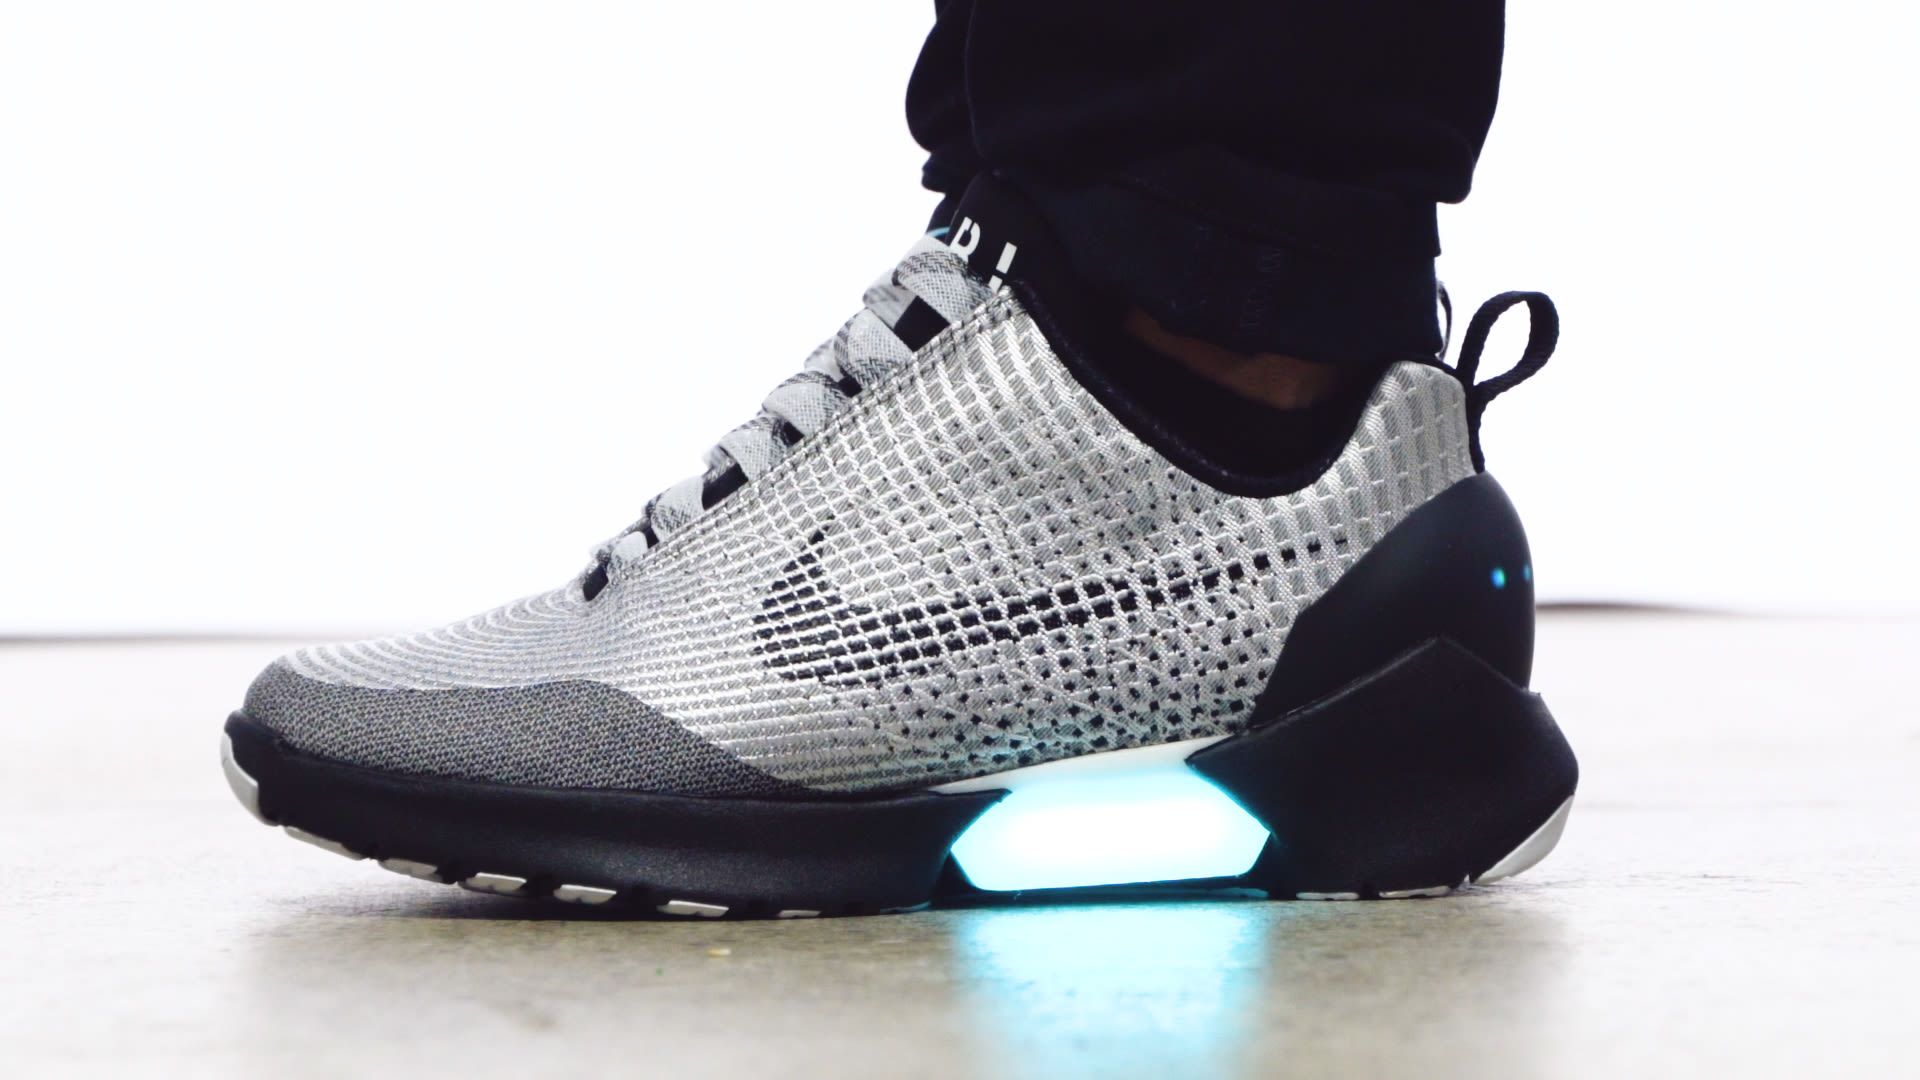 Fuera Marchitar Tentación Watch Meet the HyperAdapt, Nike's Awesome New Power-Lacing Sneaker | WIRED